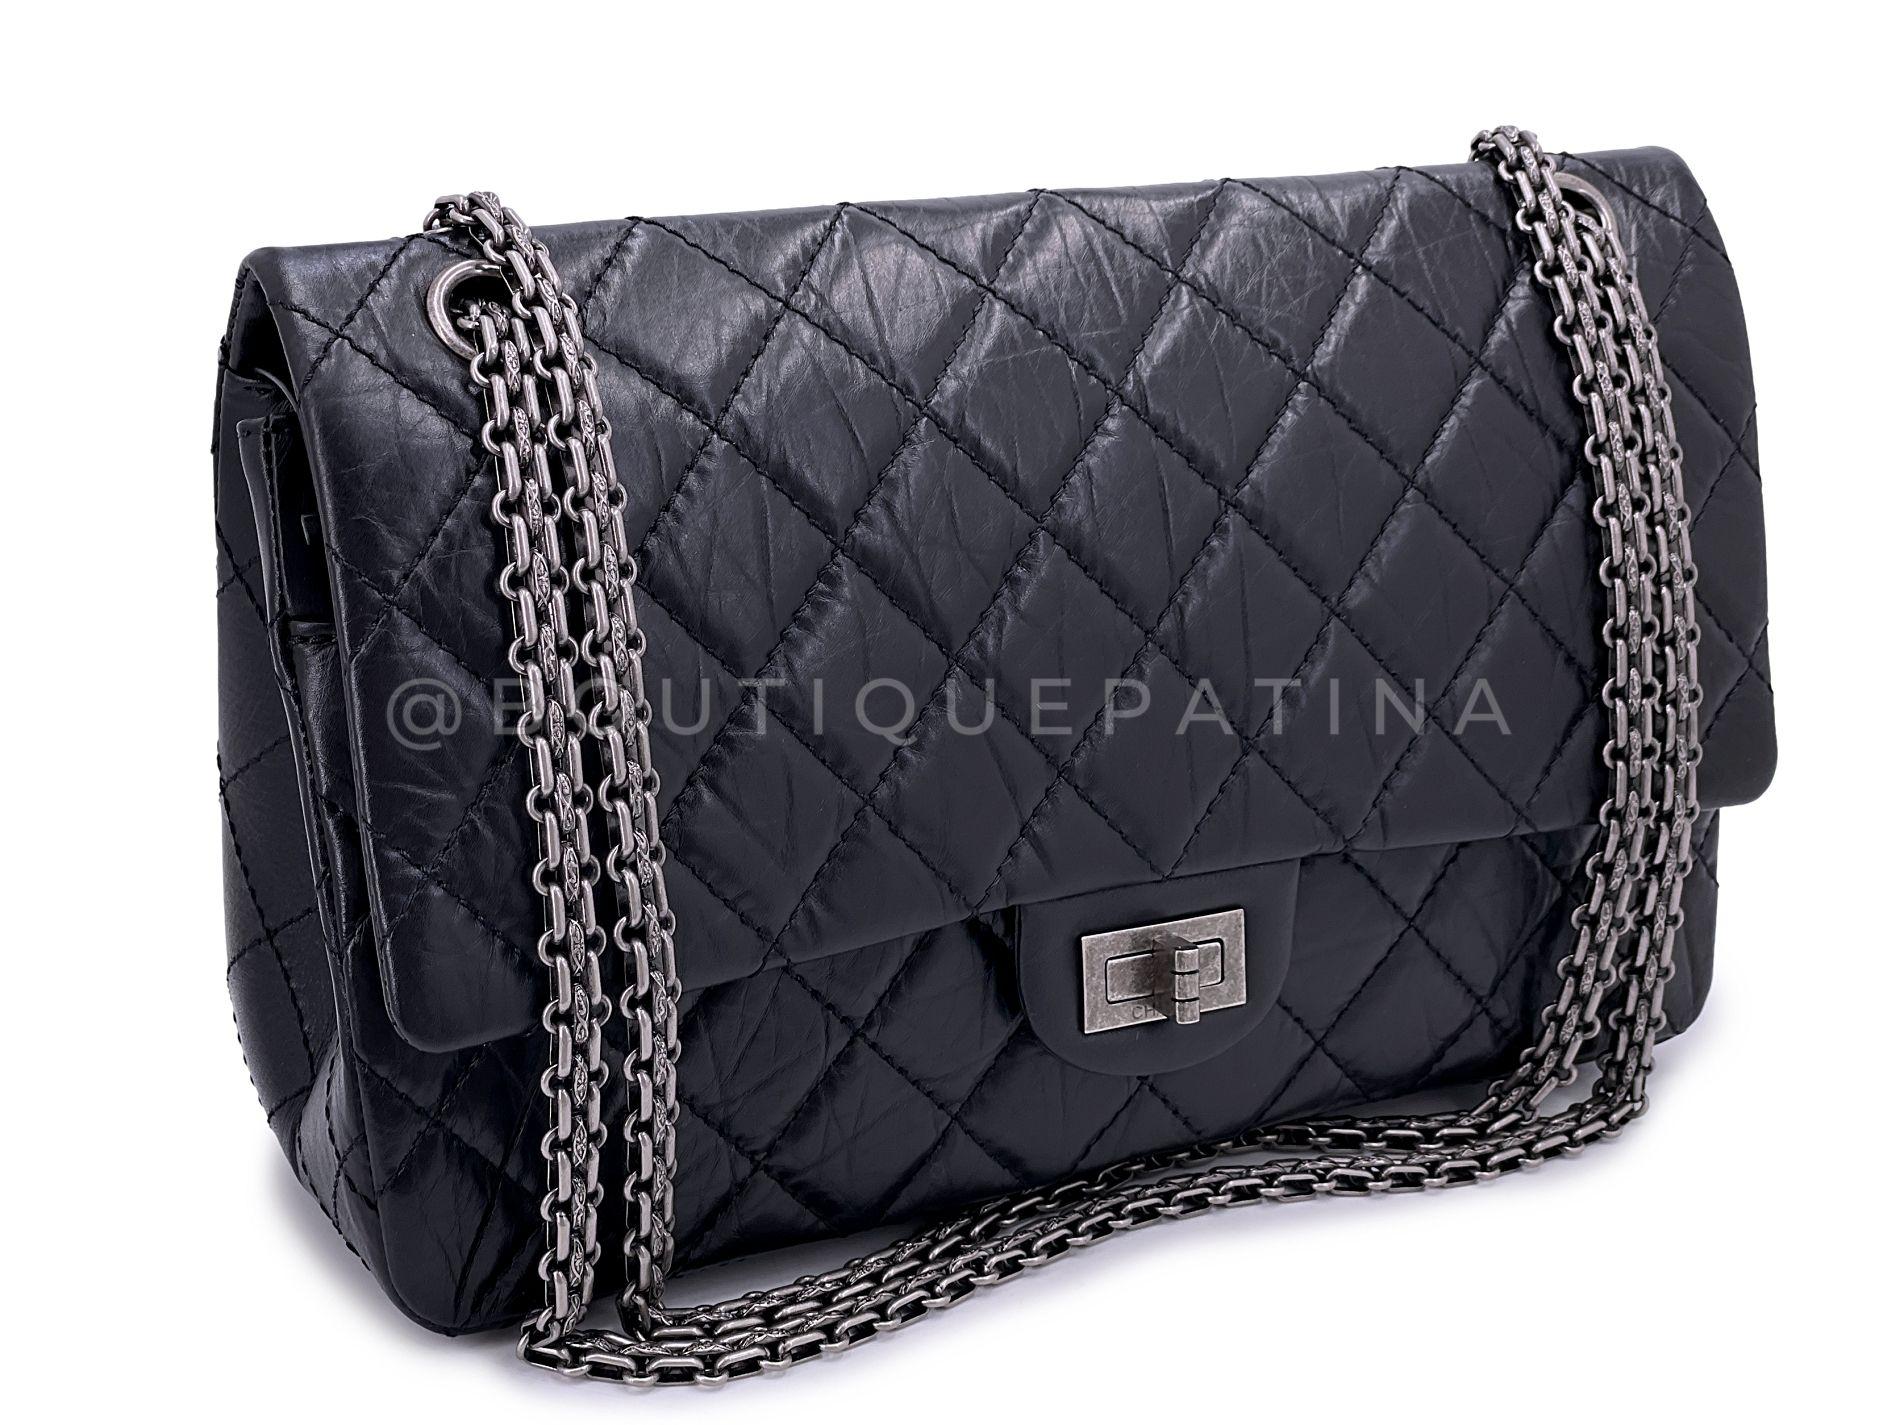 Store item: 66867
The reissue ligne is known and coveted by Chanel lovers as the original Chanel classic model, before the interlocking CC's were released. The rectangular mademoiselle lock, quilted aged calfskin and aged bijoux chain are hallmarks